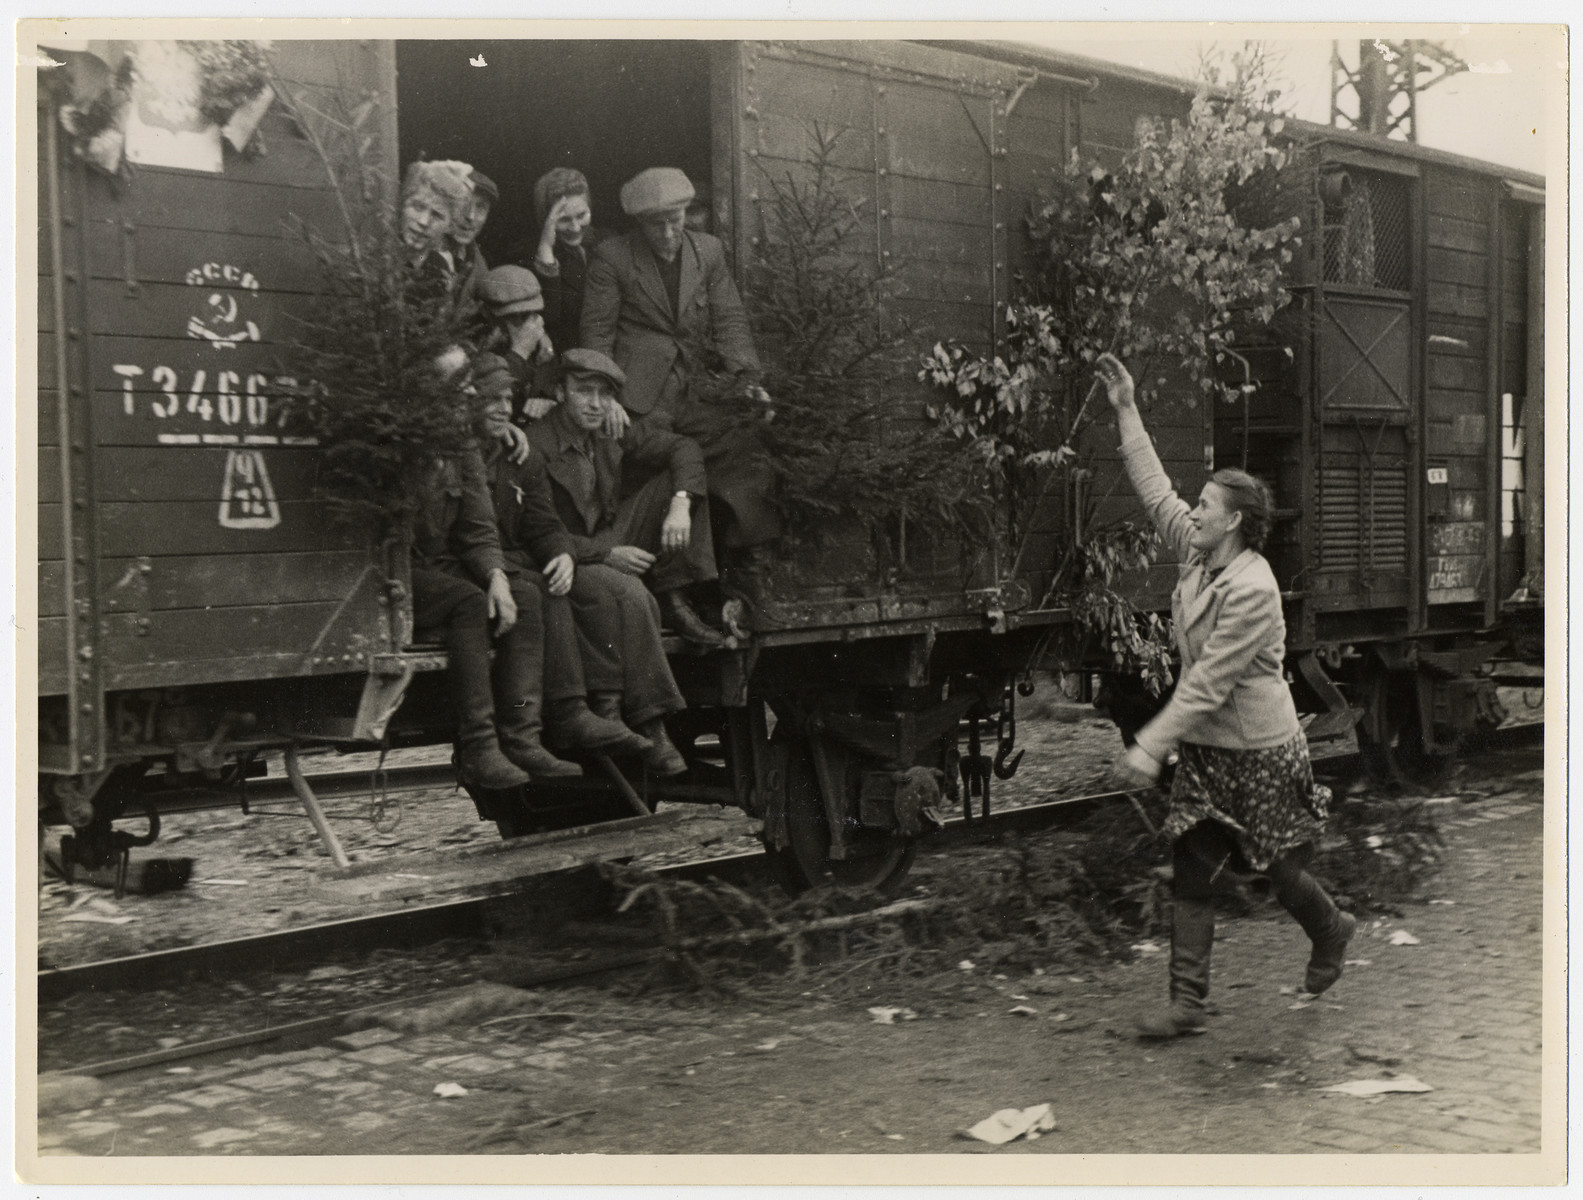 A woman waves farewell to displaced persons leaving Germany on a decorated U.S. Army train.